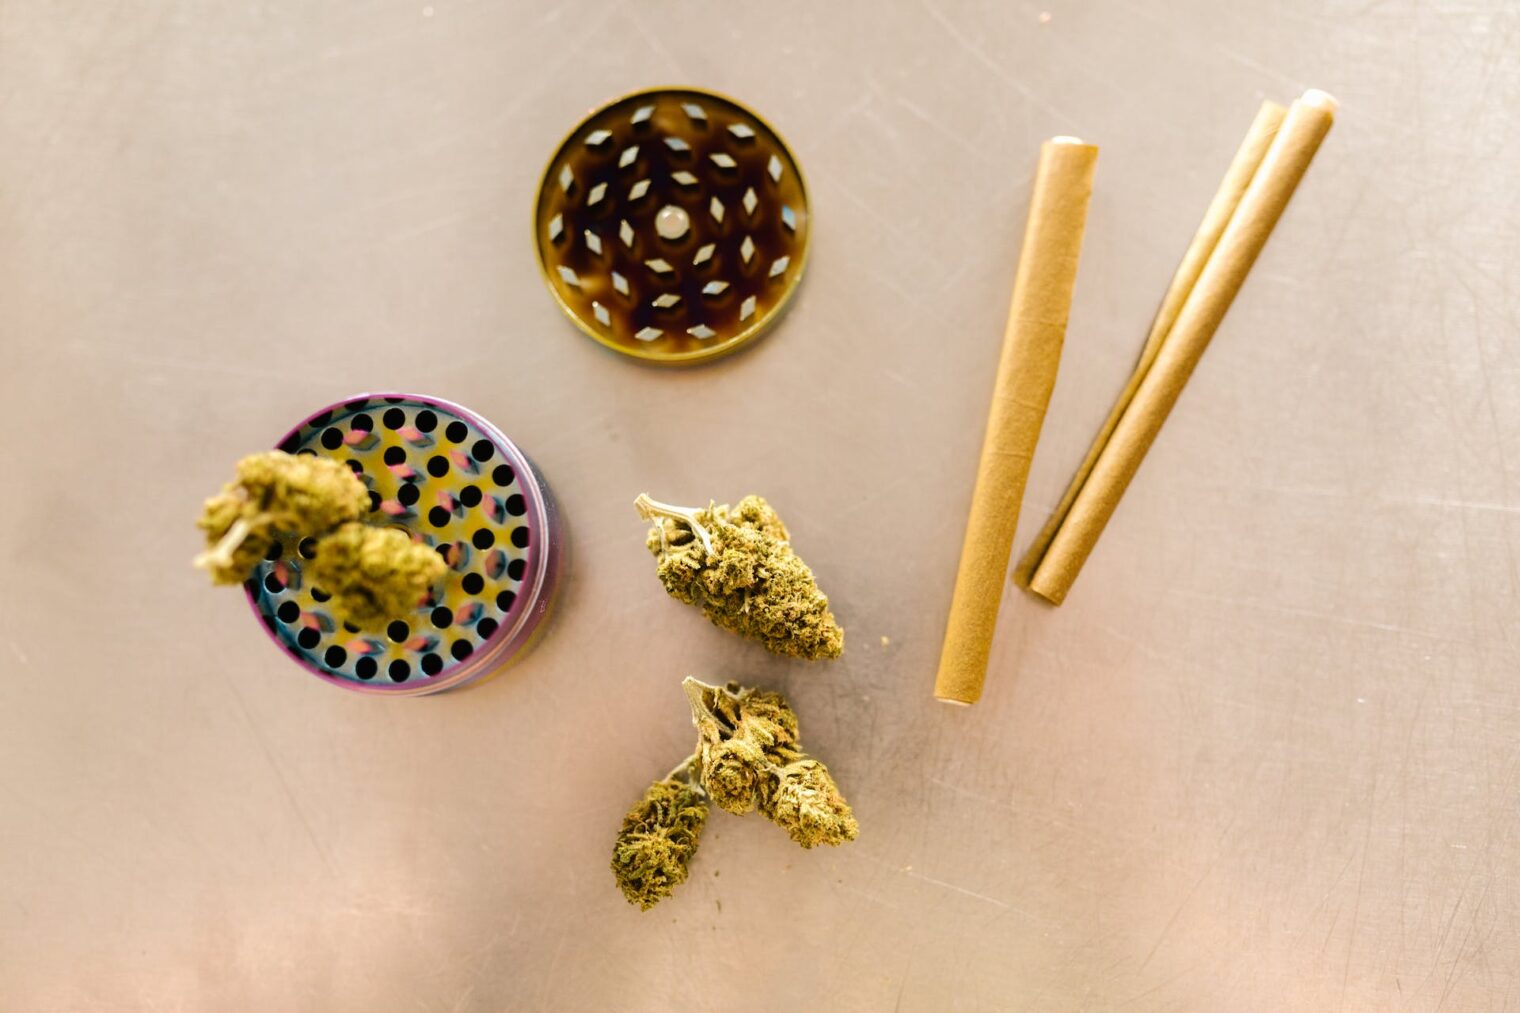 Best Weed Strains for Pain Relief